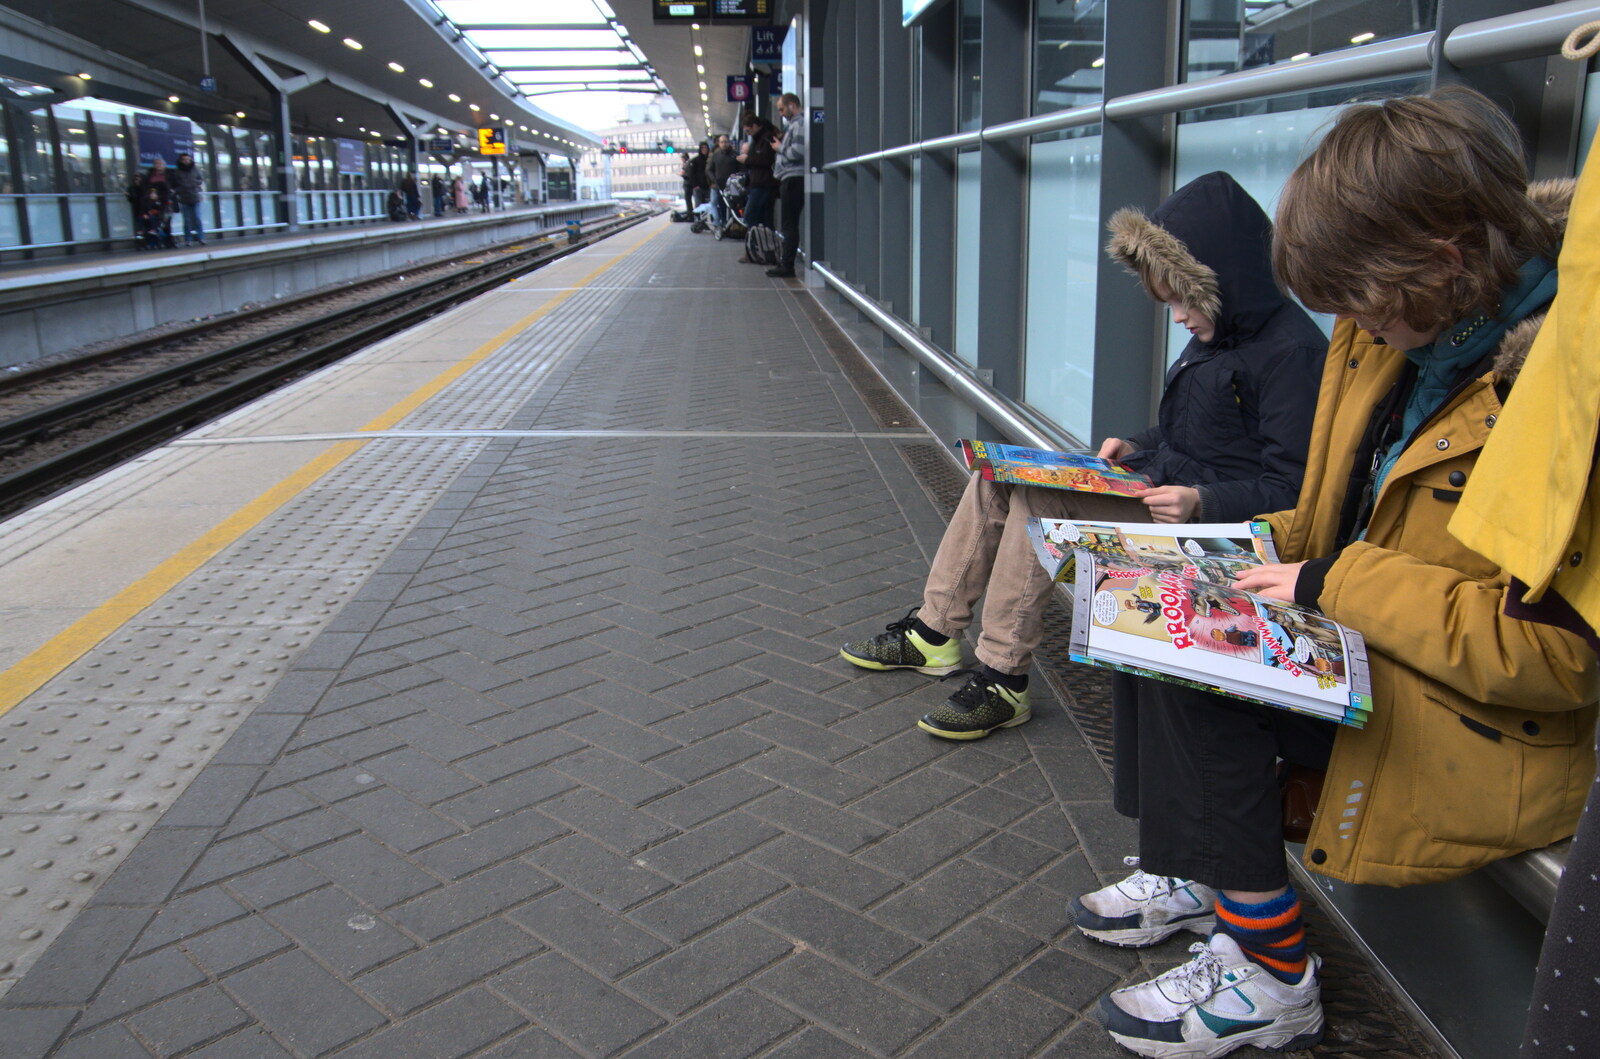 The boys read magazines as we wait for our train from HMS Belfast and the South Bank, Southwark, London - 17th February 2020